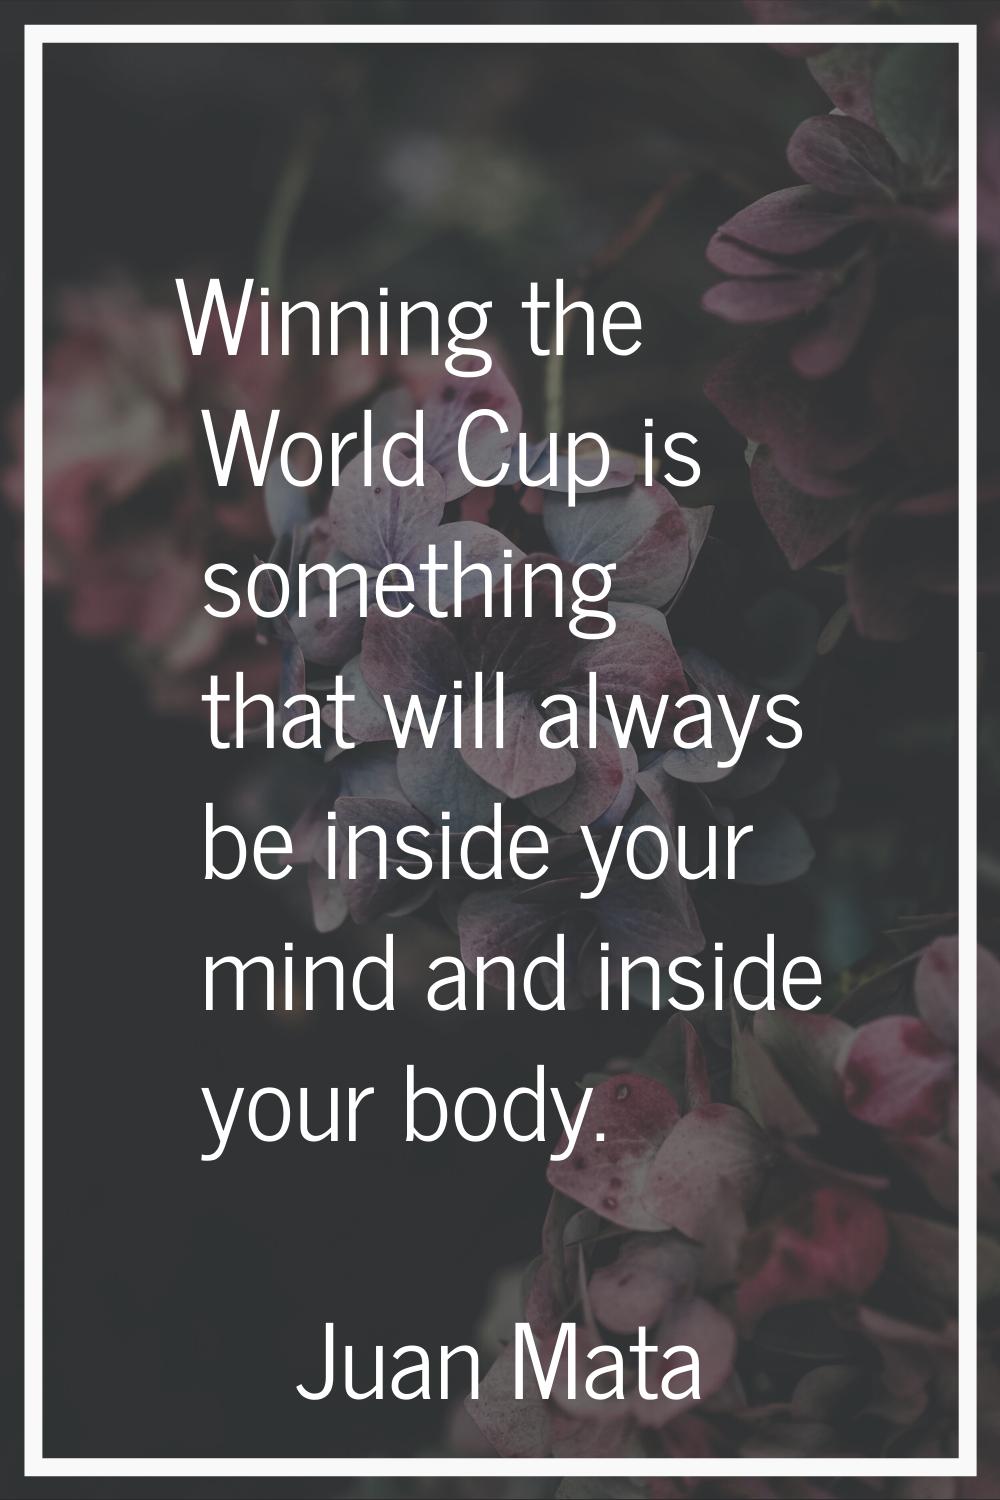 Winning the World Cup is something that will always be inside your mind and inside your body.